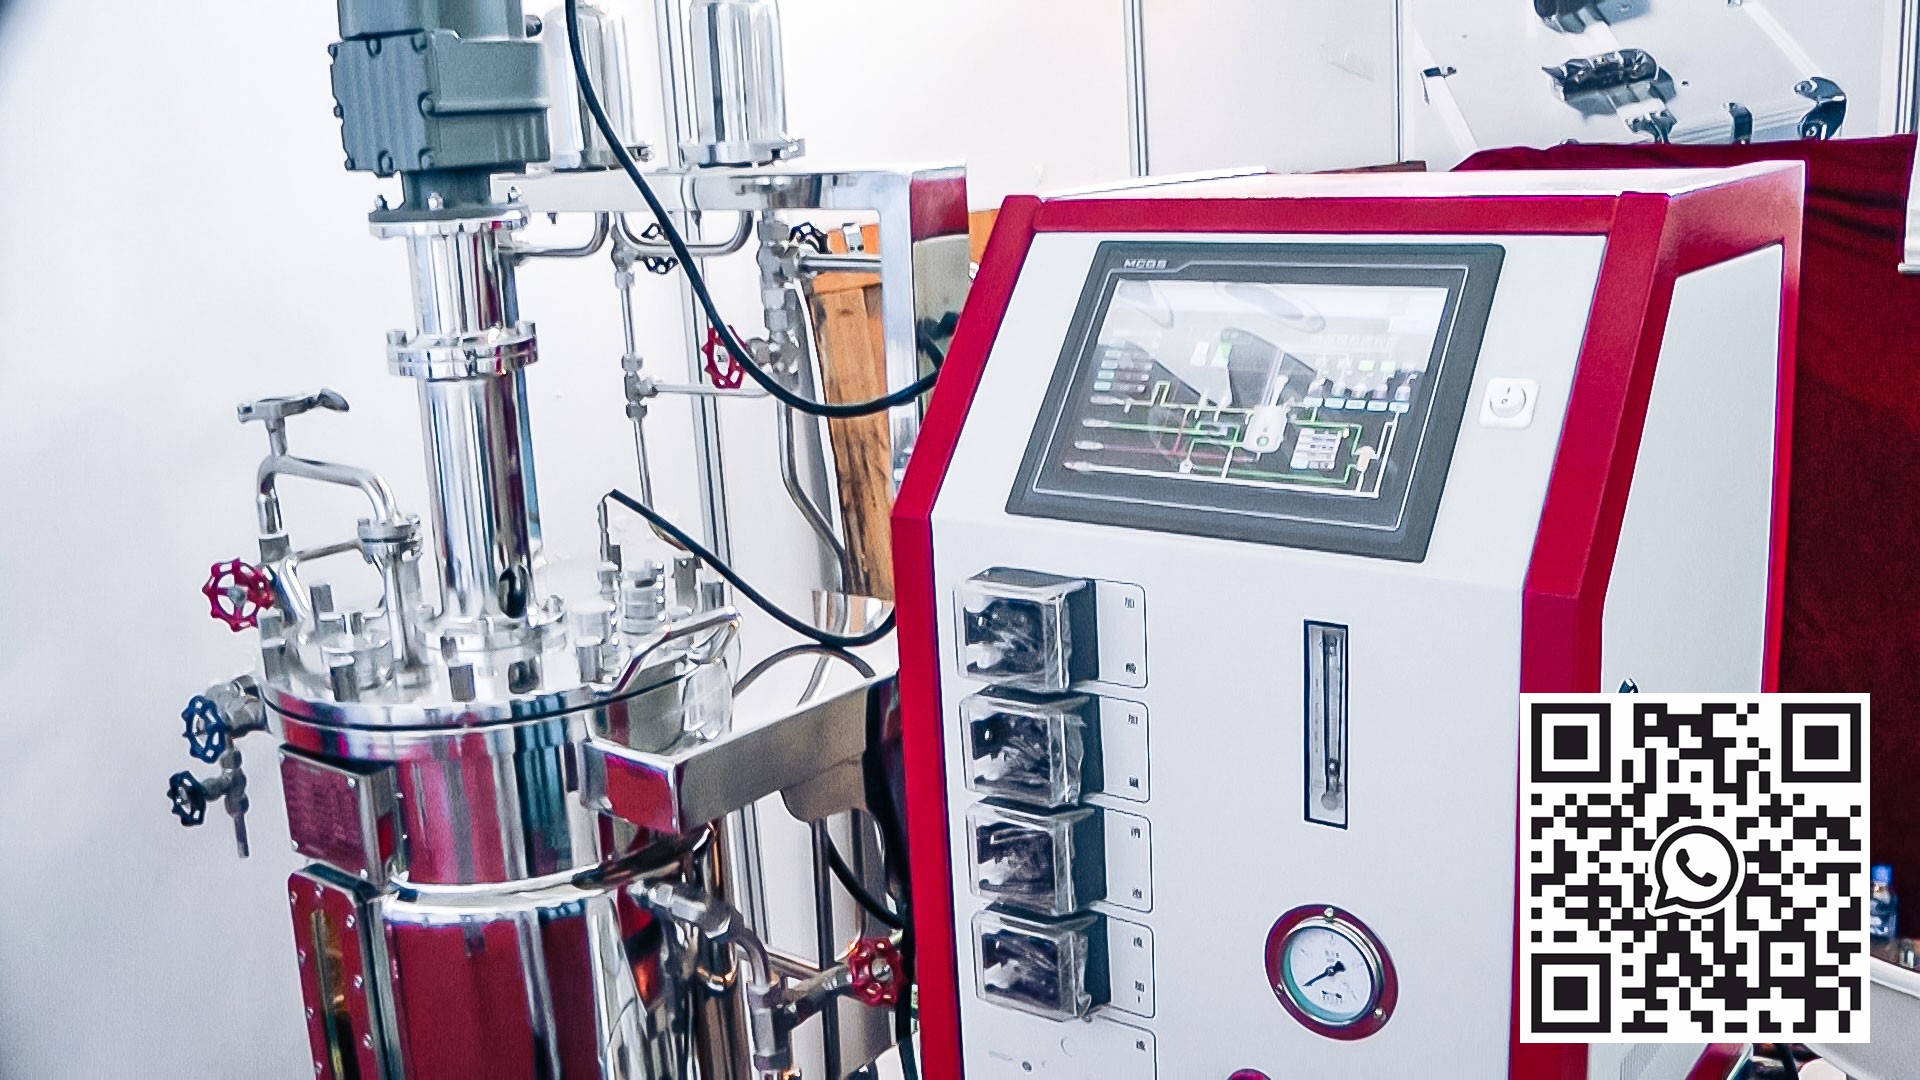 Automatic equipment for preparation of oil extracts in pharmaceutical production